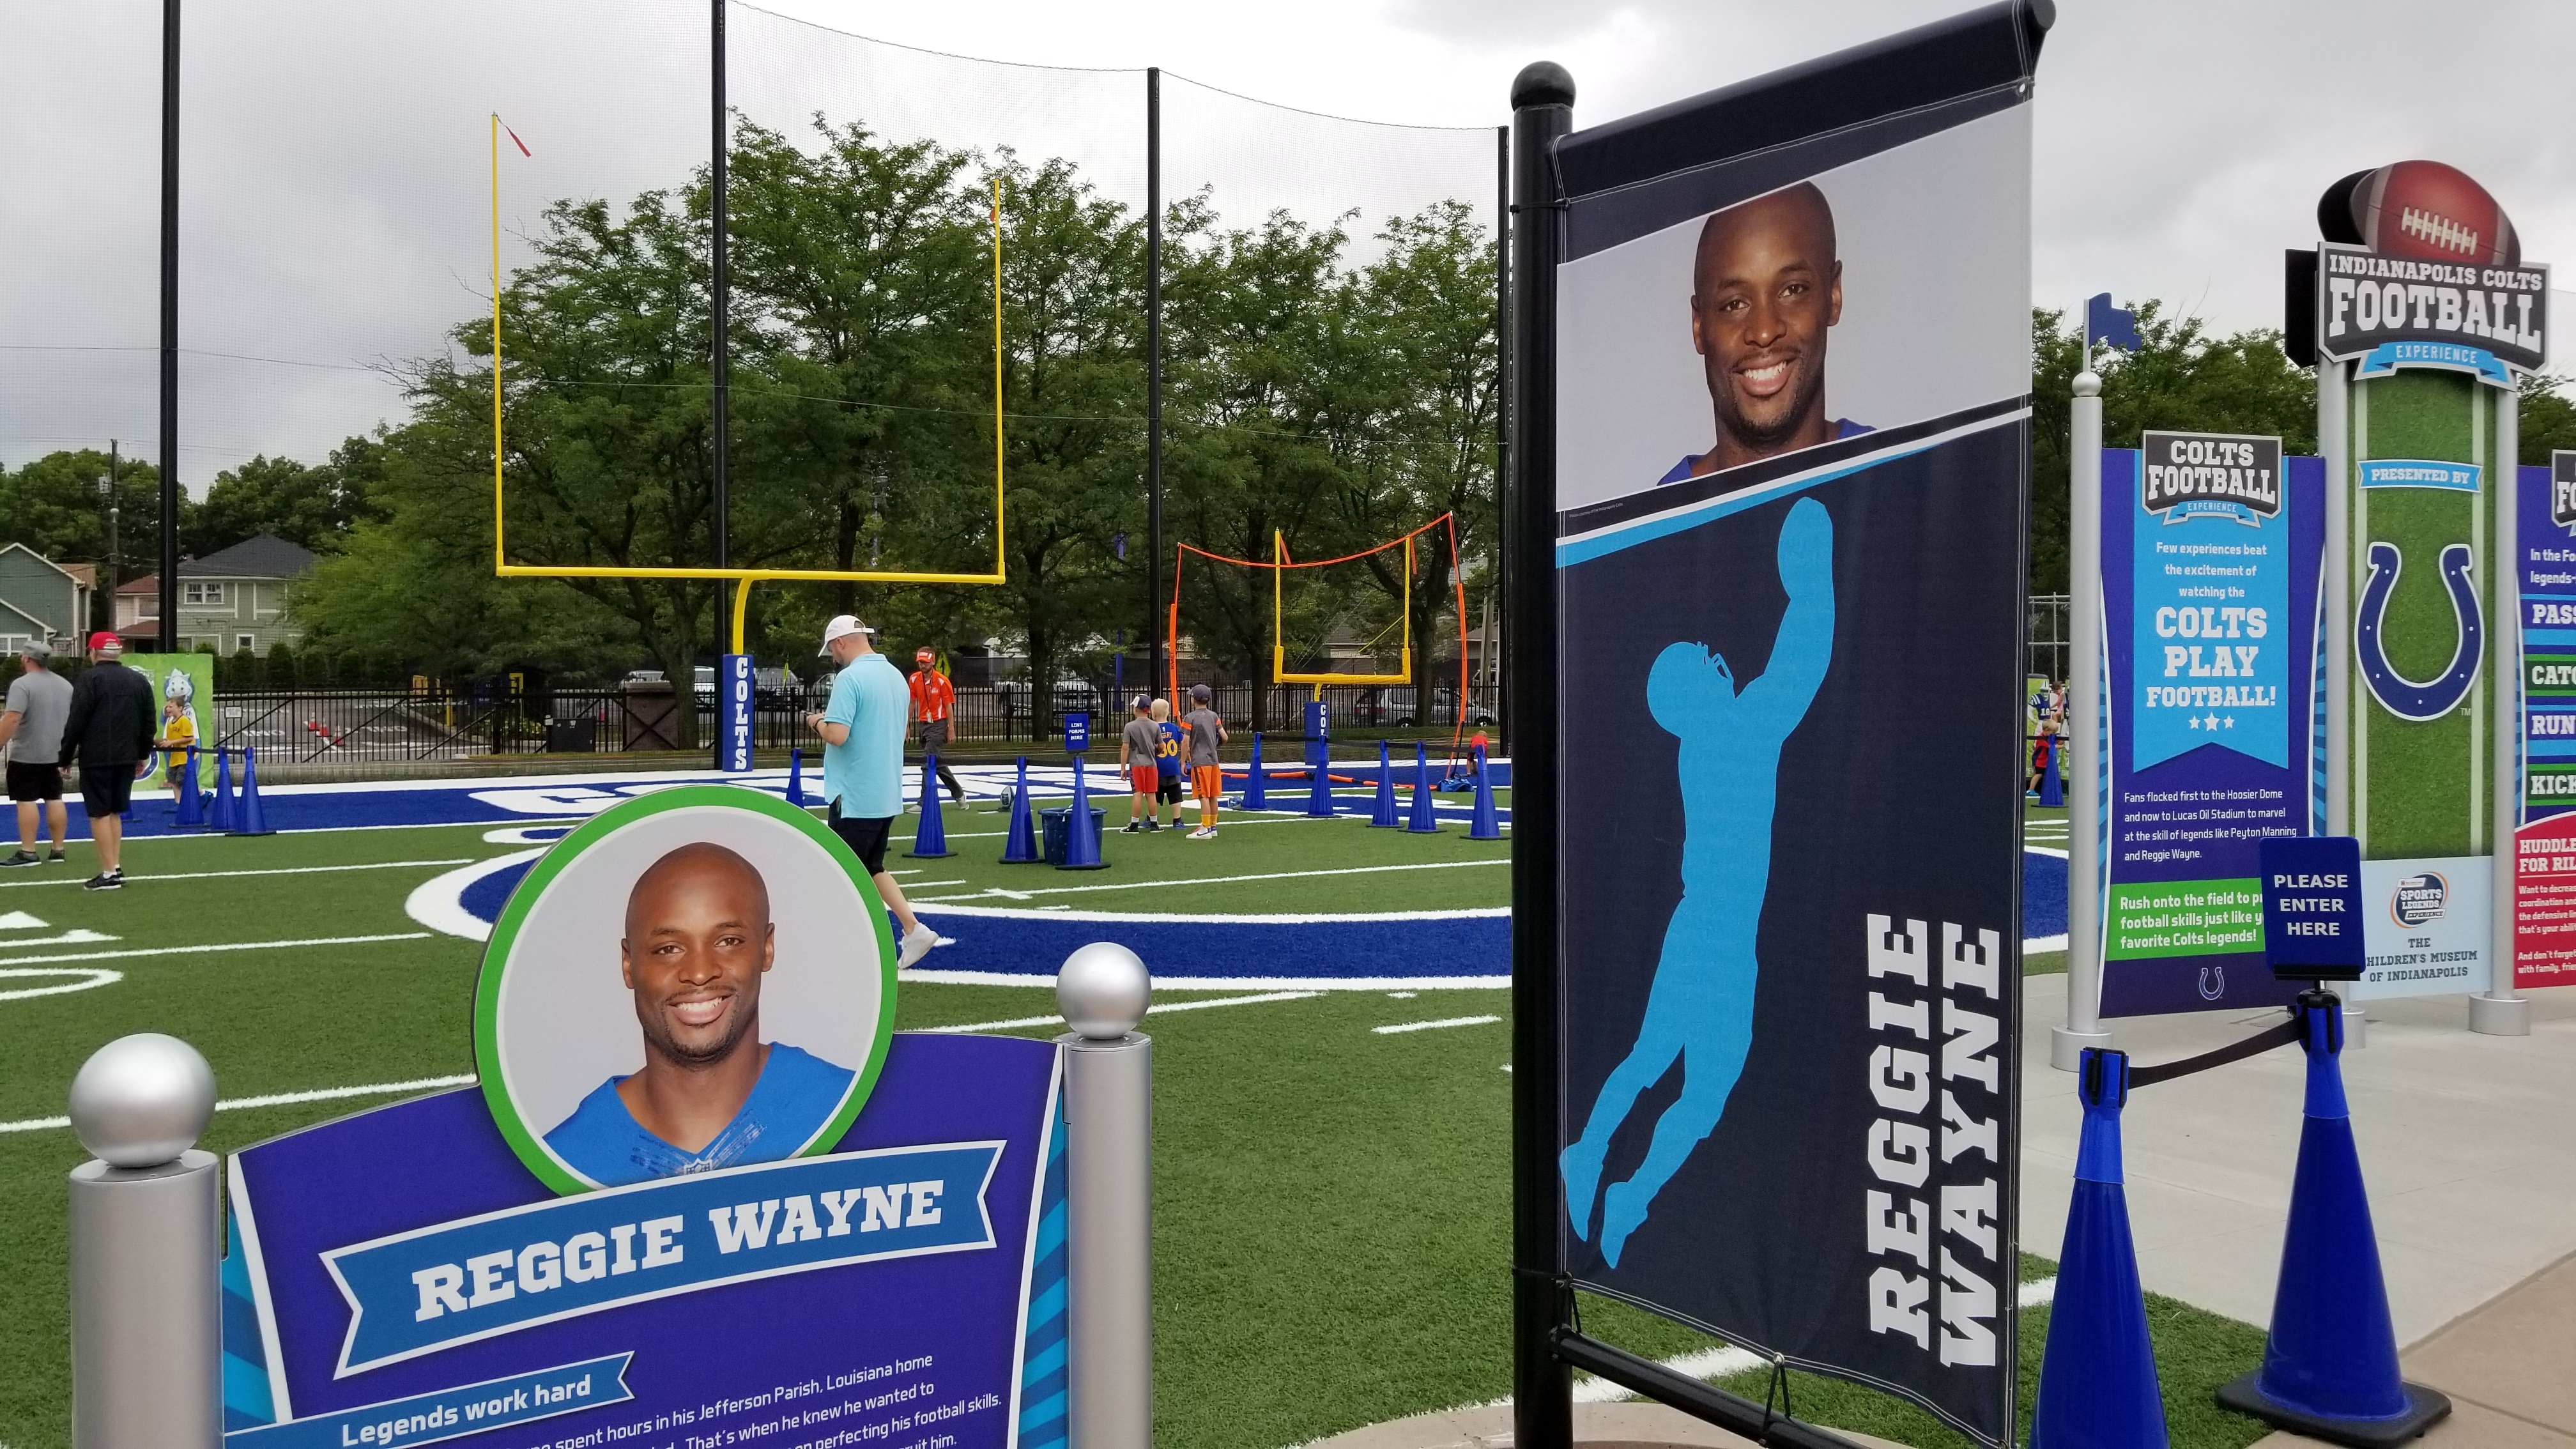 Football Sports Legends Experience